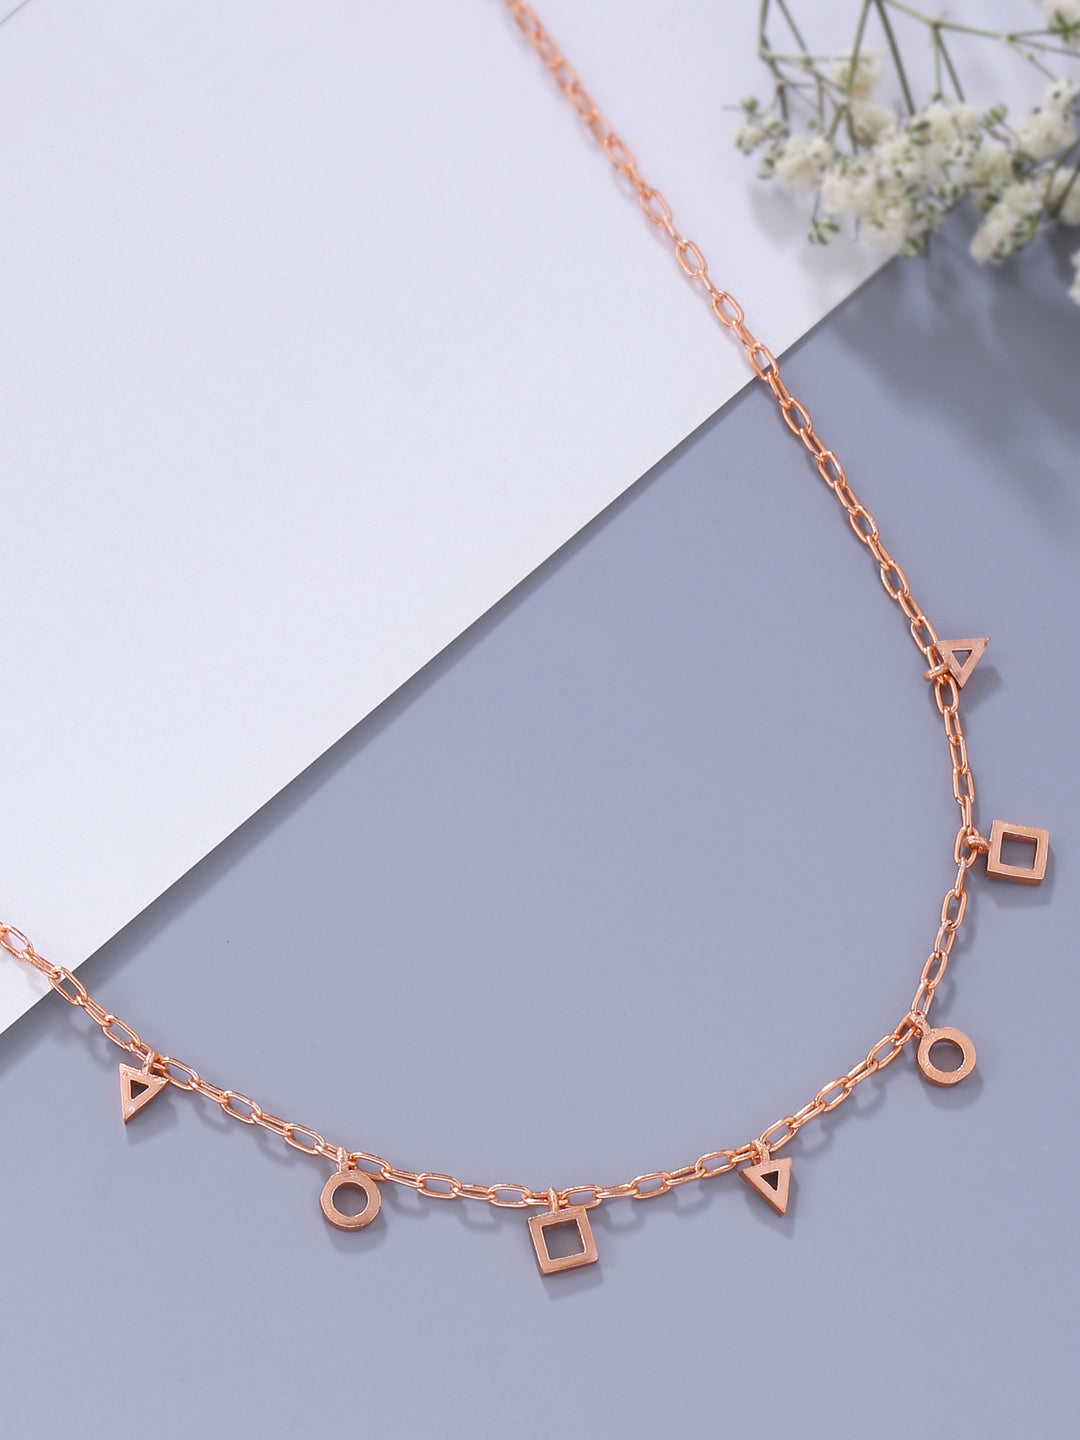 Men's Cross Necklace, Gold Layered Rope Chain Cross Pendant Necklace Simple  Jewelry Gift Chain Necklace for Men Women Boys Girls - Walmart.com